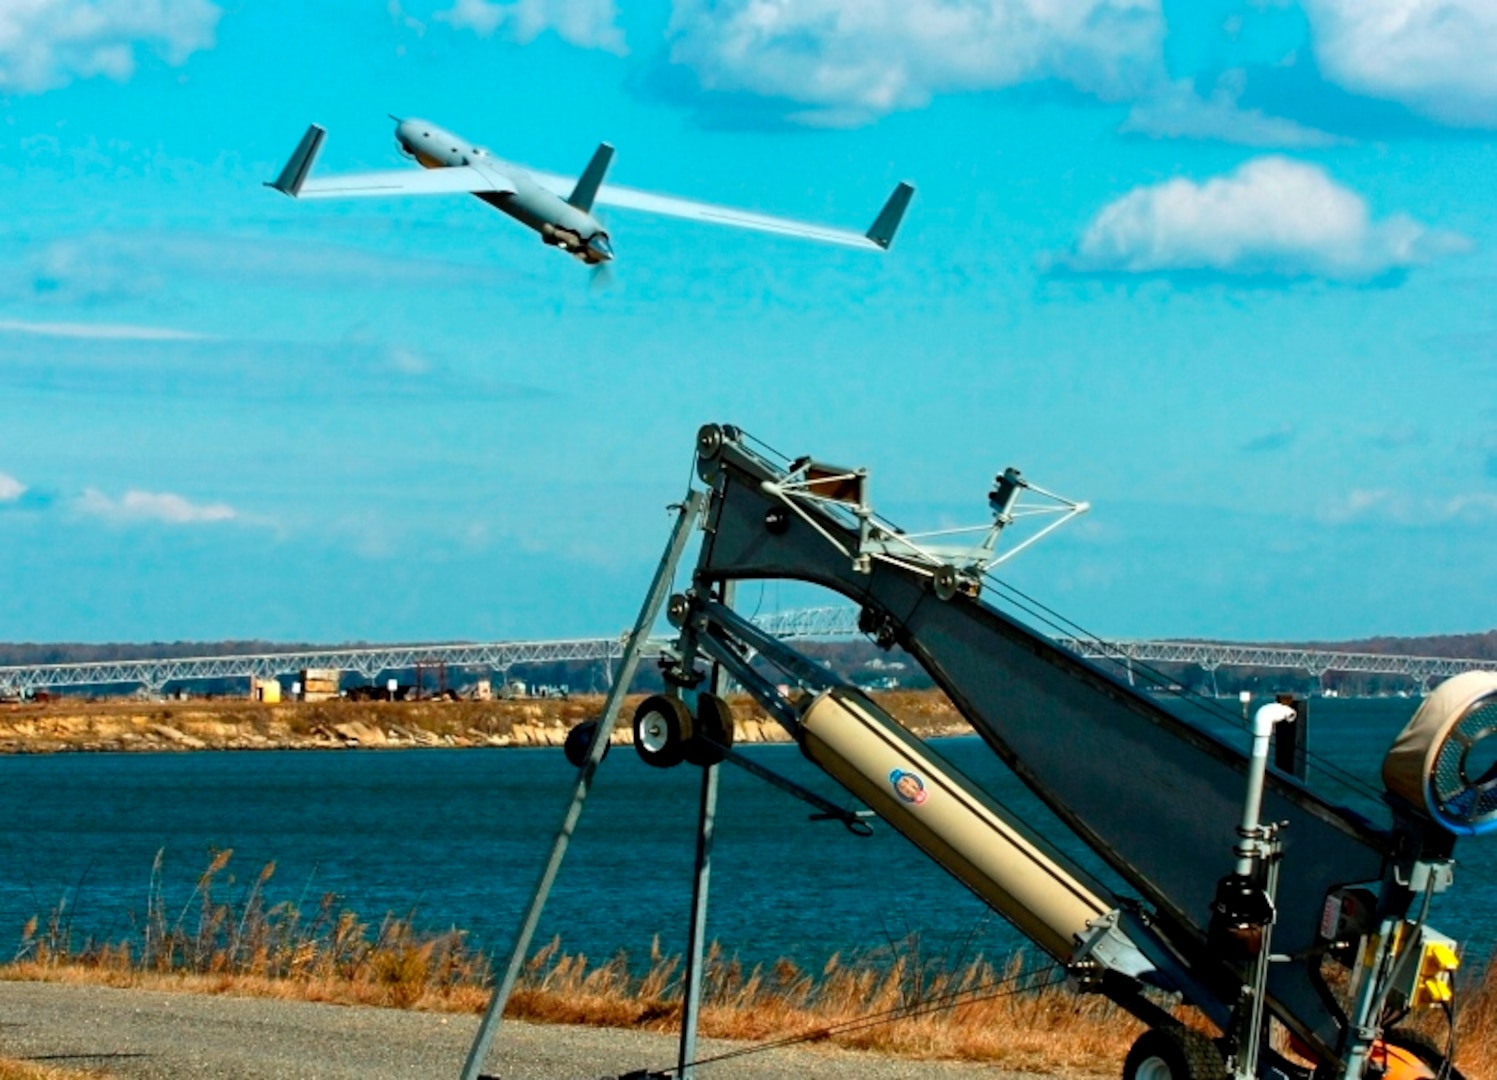 A Scan Eagle unmanned aerial vehicle launches from the Naval Surface Warfare Center Dahlgren Division (NSWCDD) Potomac River Test Range during a surface warfare integration test featuring the virtual USS Dahlgren. Scan Eagle identified, targeted, engaged and supported reengagement throughout the experiment as the NSWCDD-patented Visual Automatic Scoring System sent gun targeting corrections to the MK160 gun weapon system operator. "USS Dahlgren is empowering our integration of unmanned air and surface vehicles into the fire-control-loop for greatly expanded battle space and increased reaction times," said Neil Baron, NSWCDD distinguished scientist for combat control.   